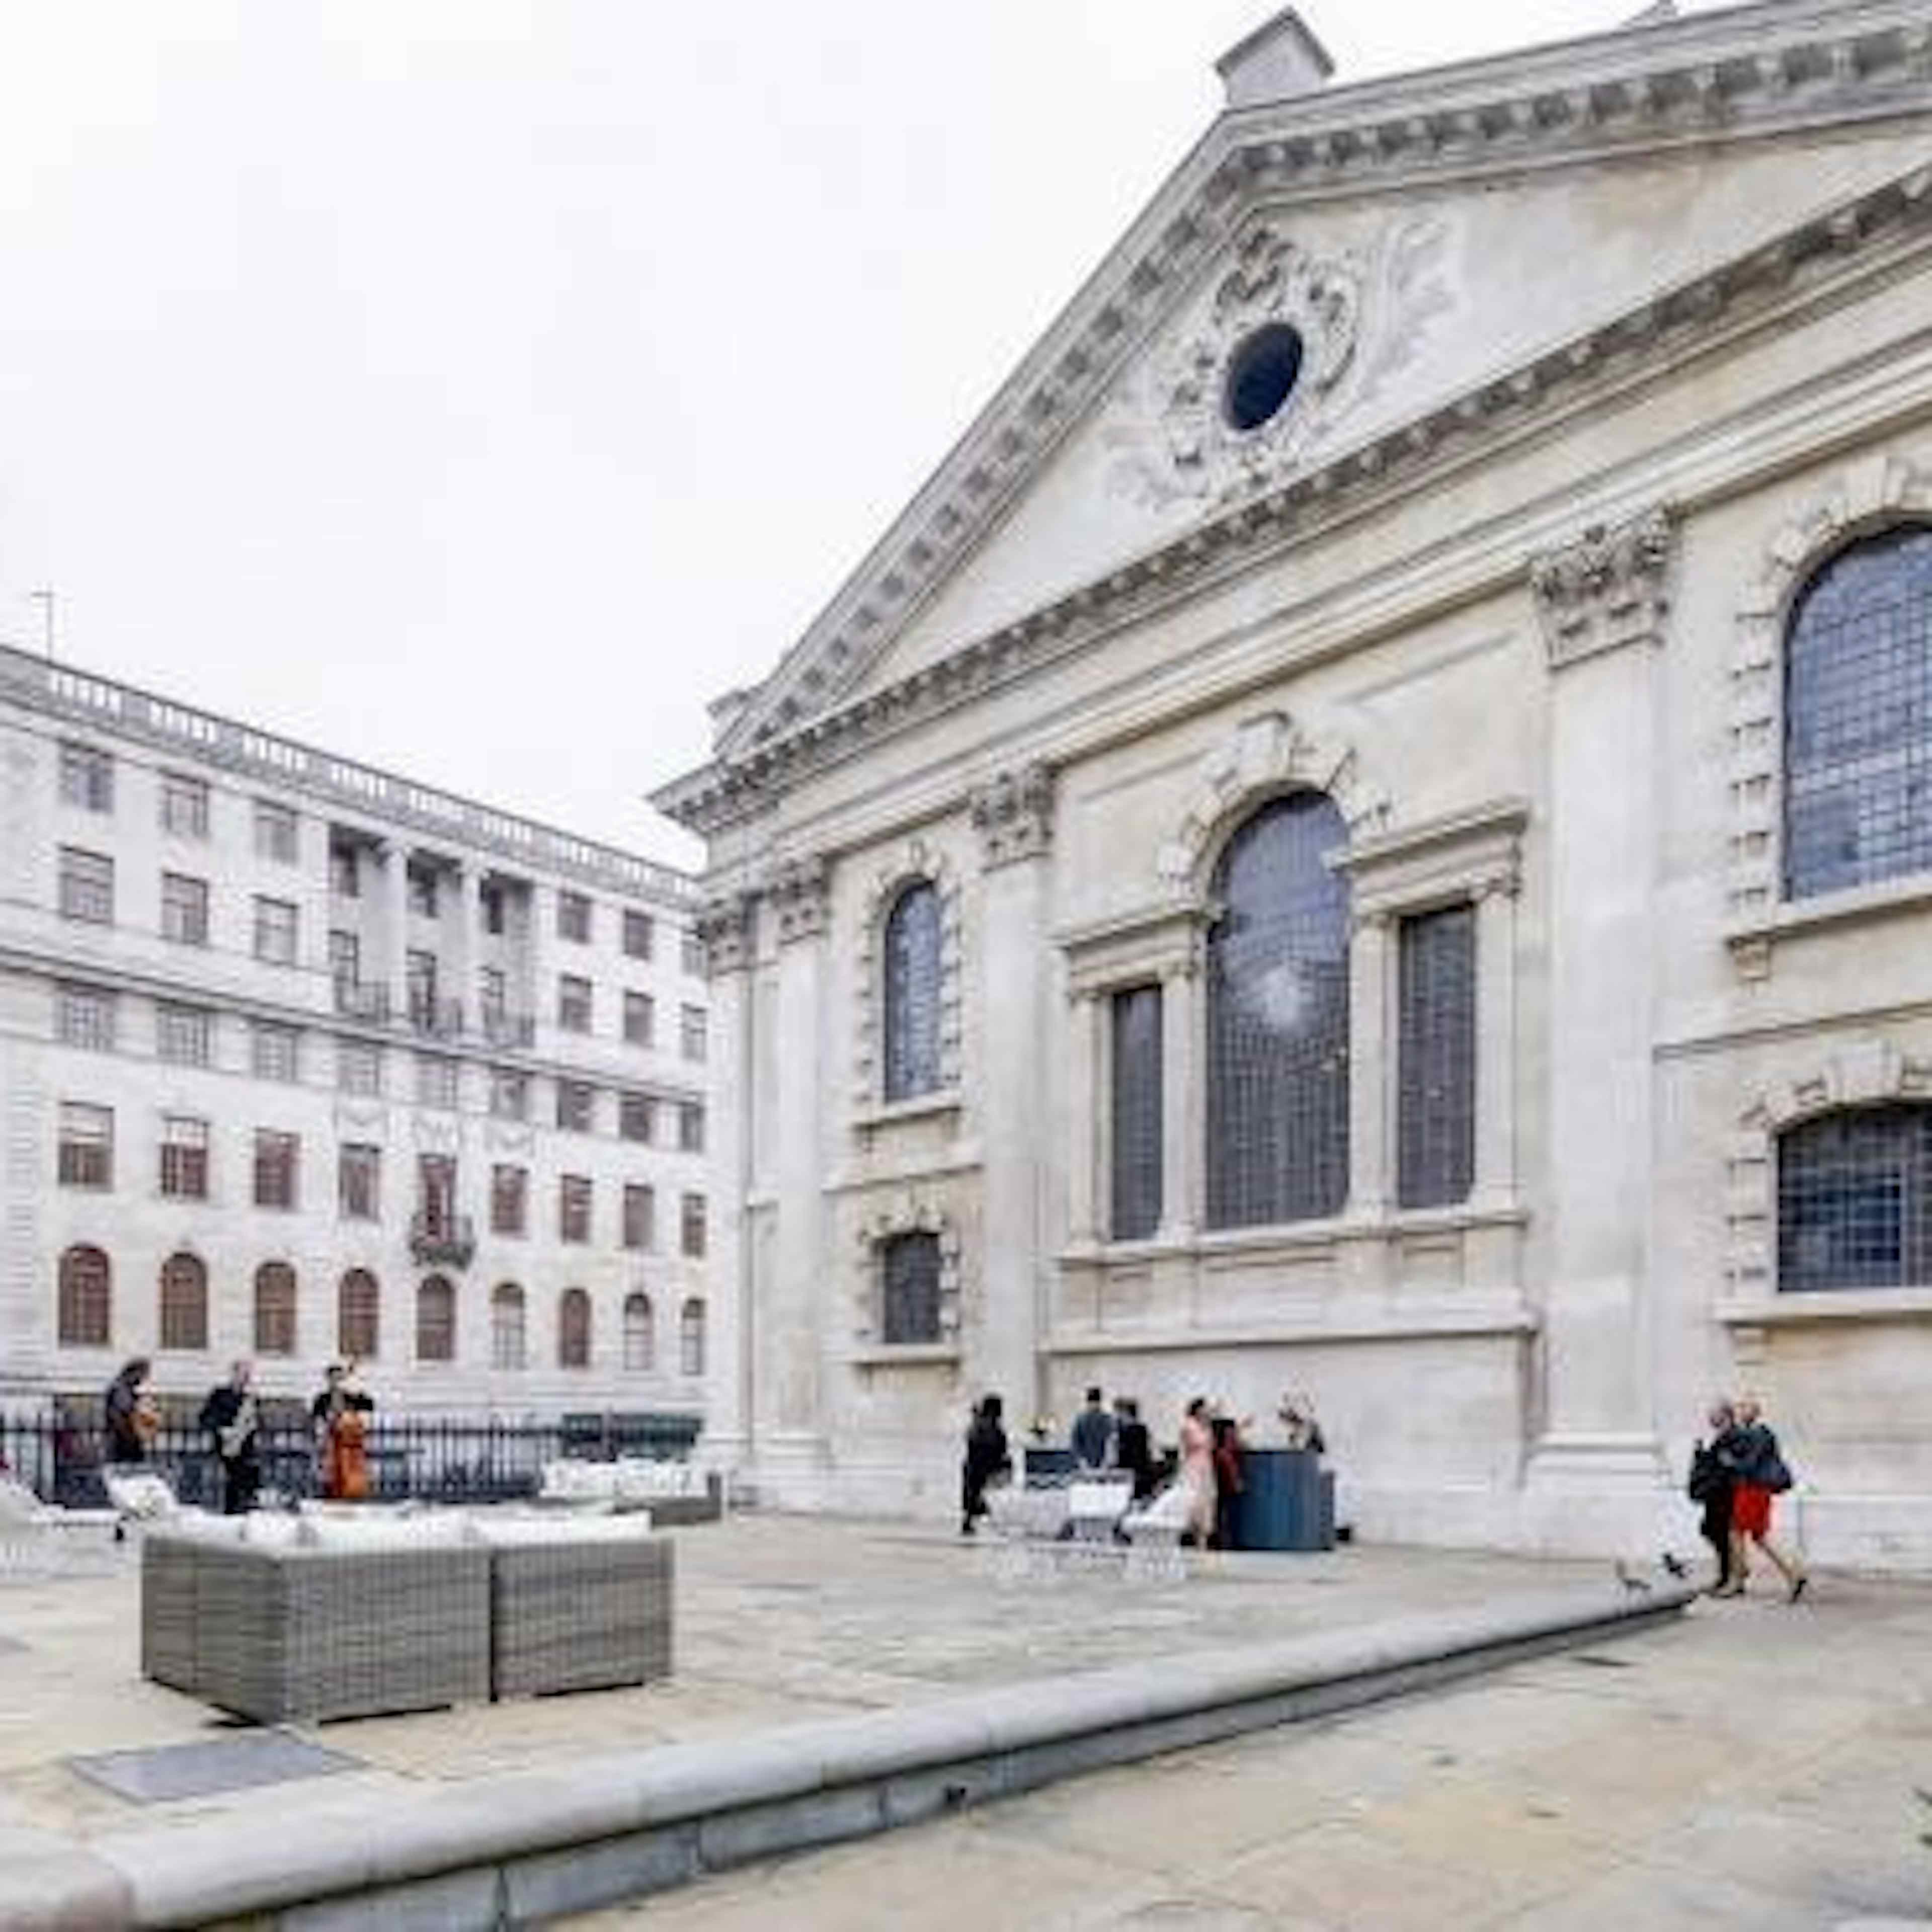 St Martin-in-the-Fields - The Courtyard image 3